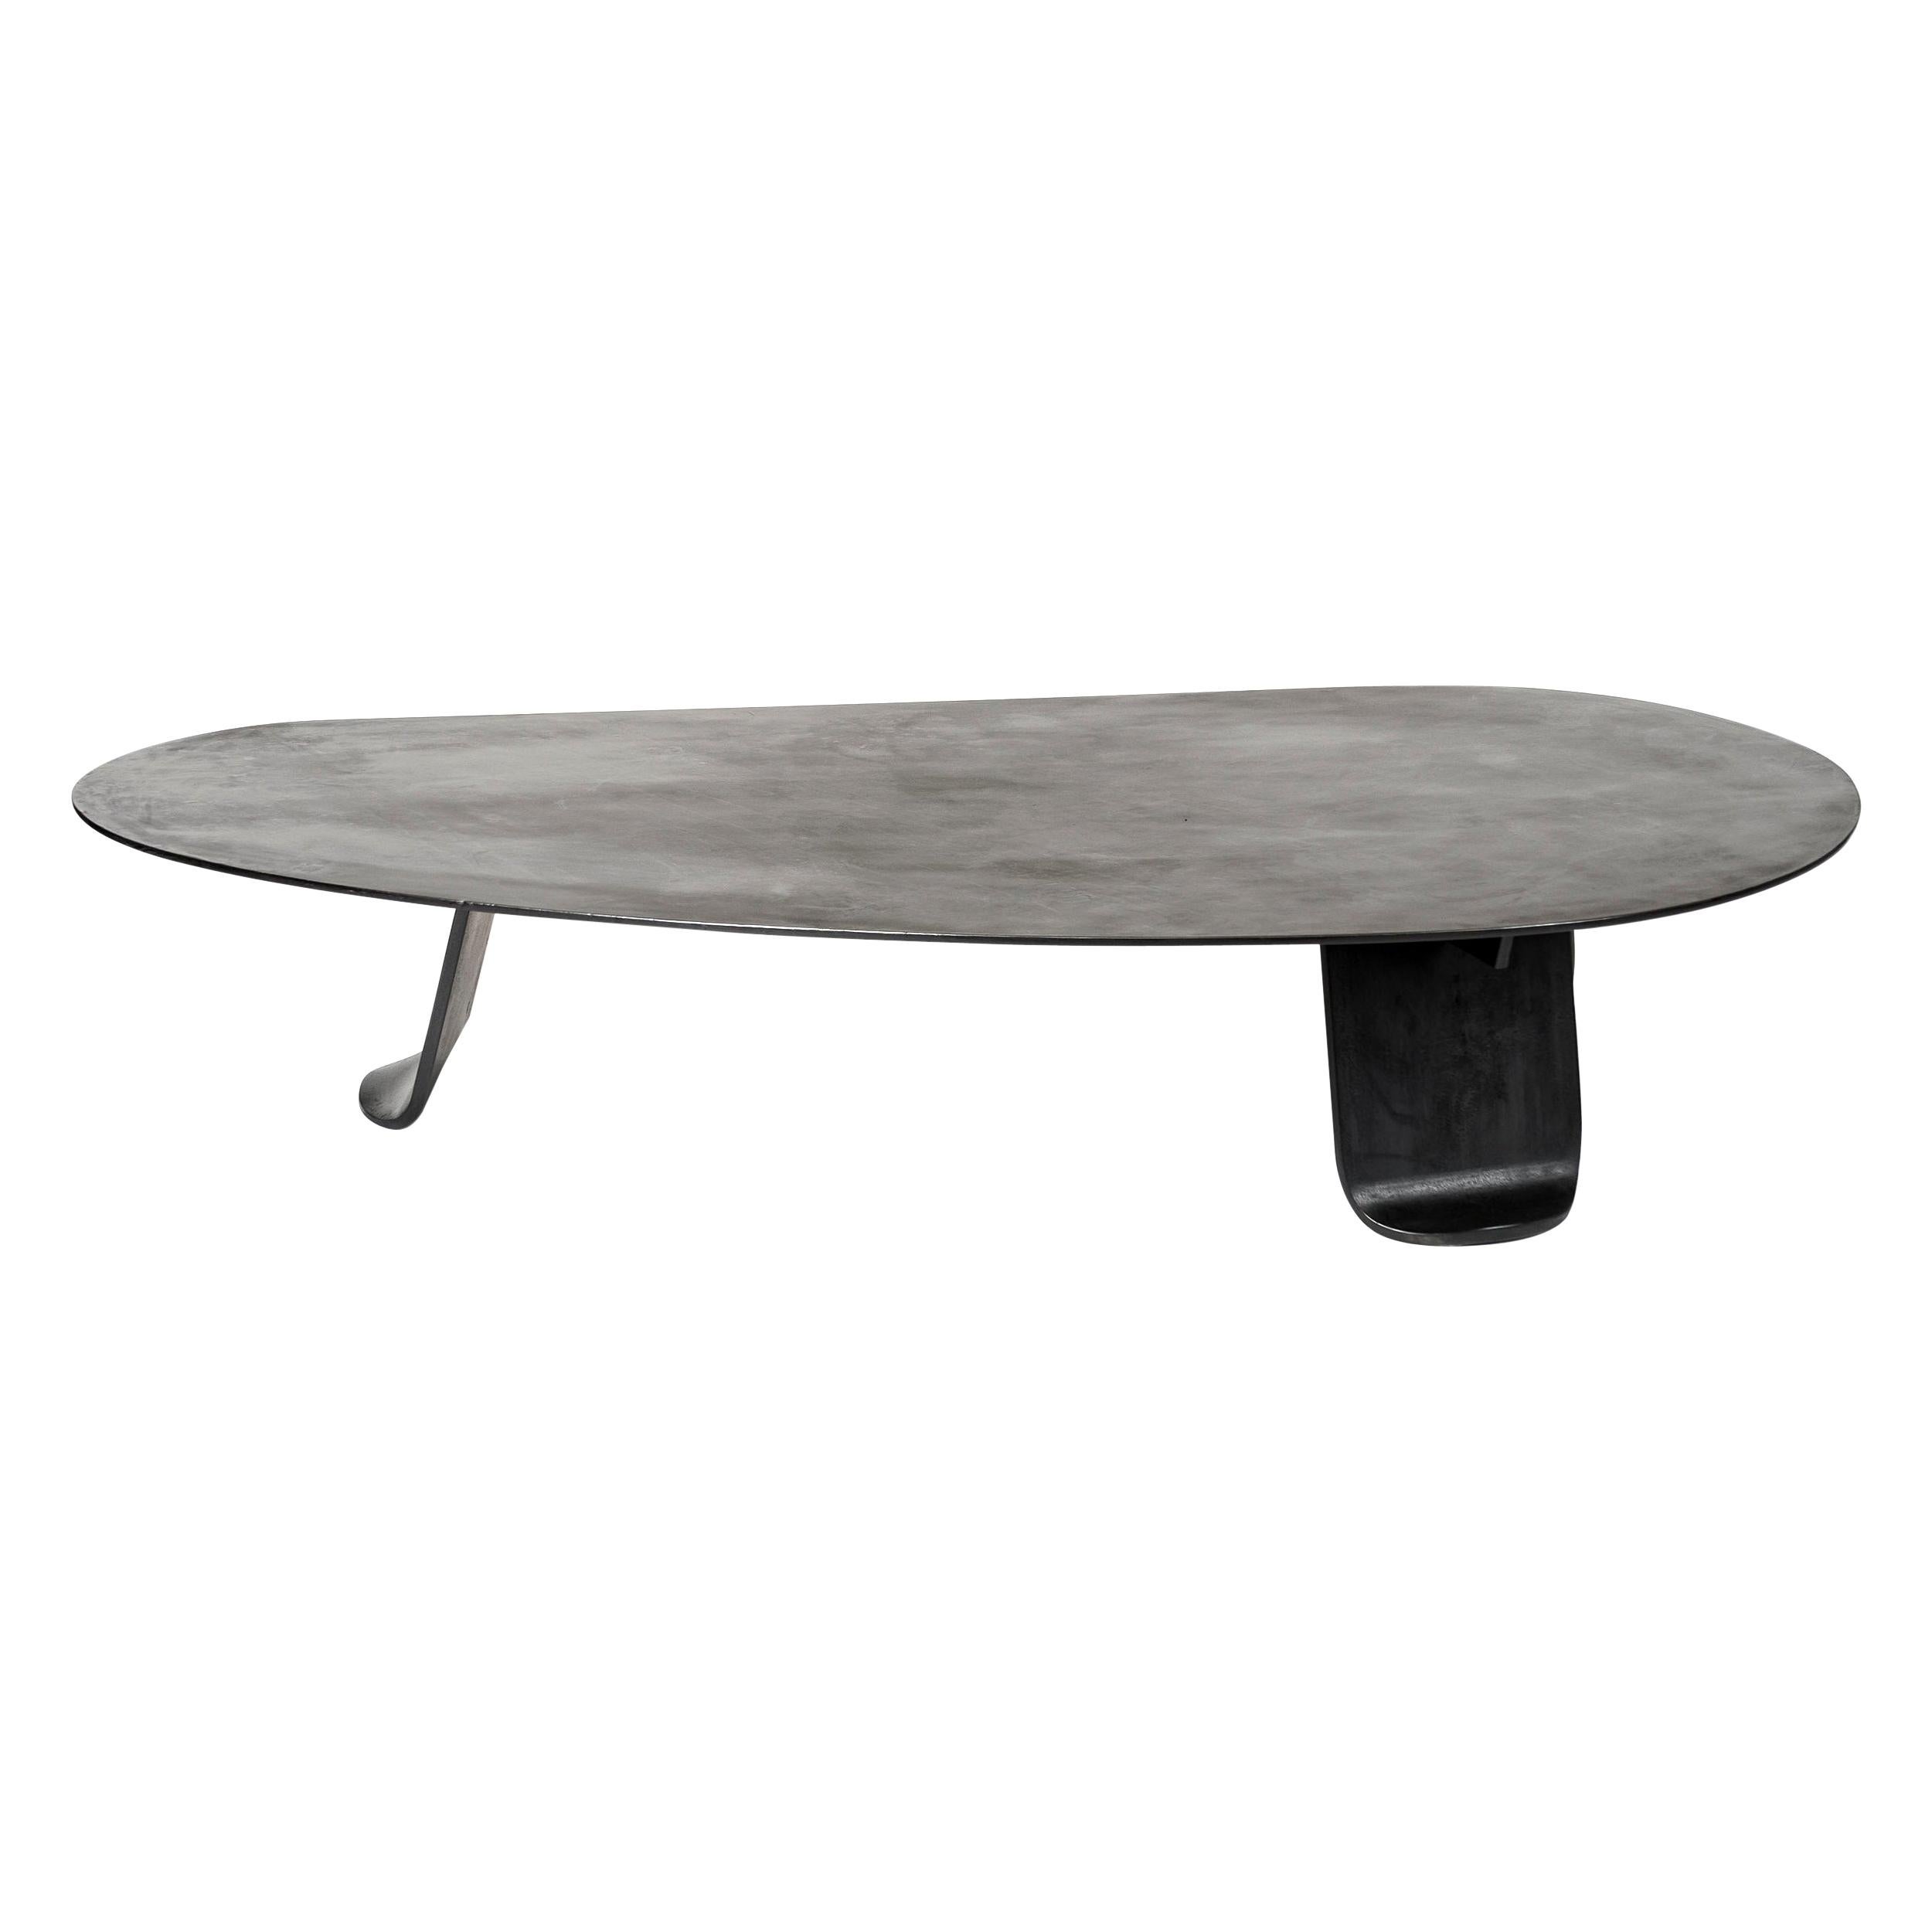 WYETH Chrysalis Table No. 1 in Patinated Steel with Hot Zinc Finish